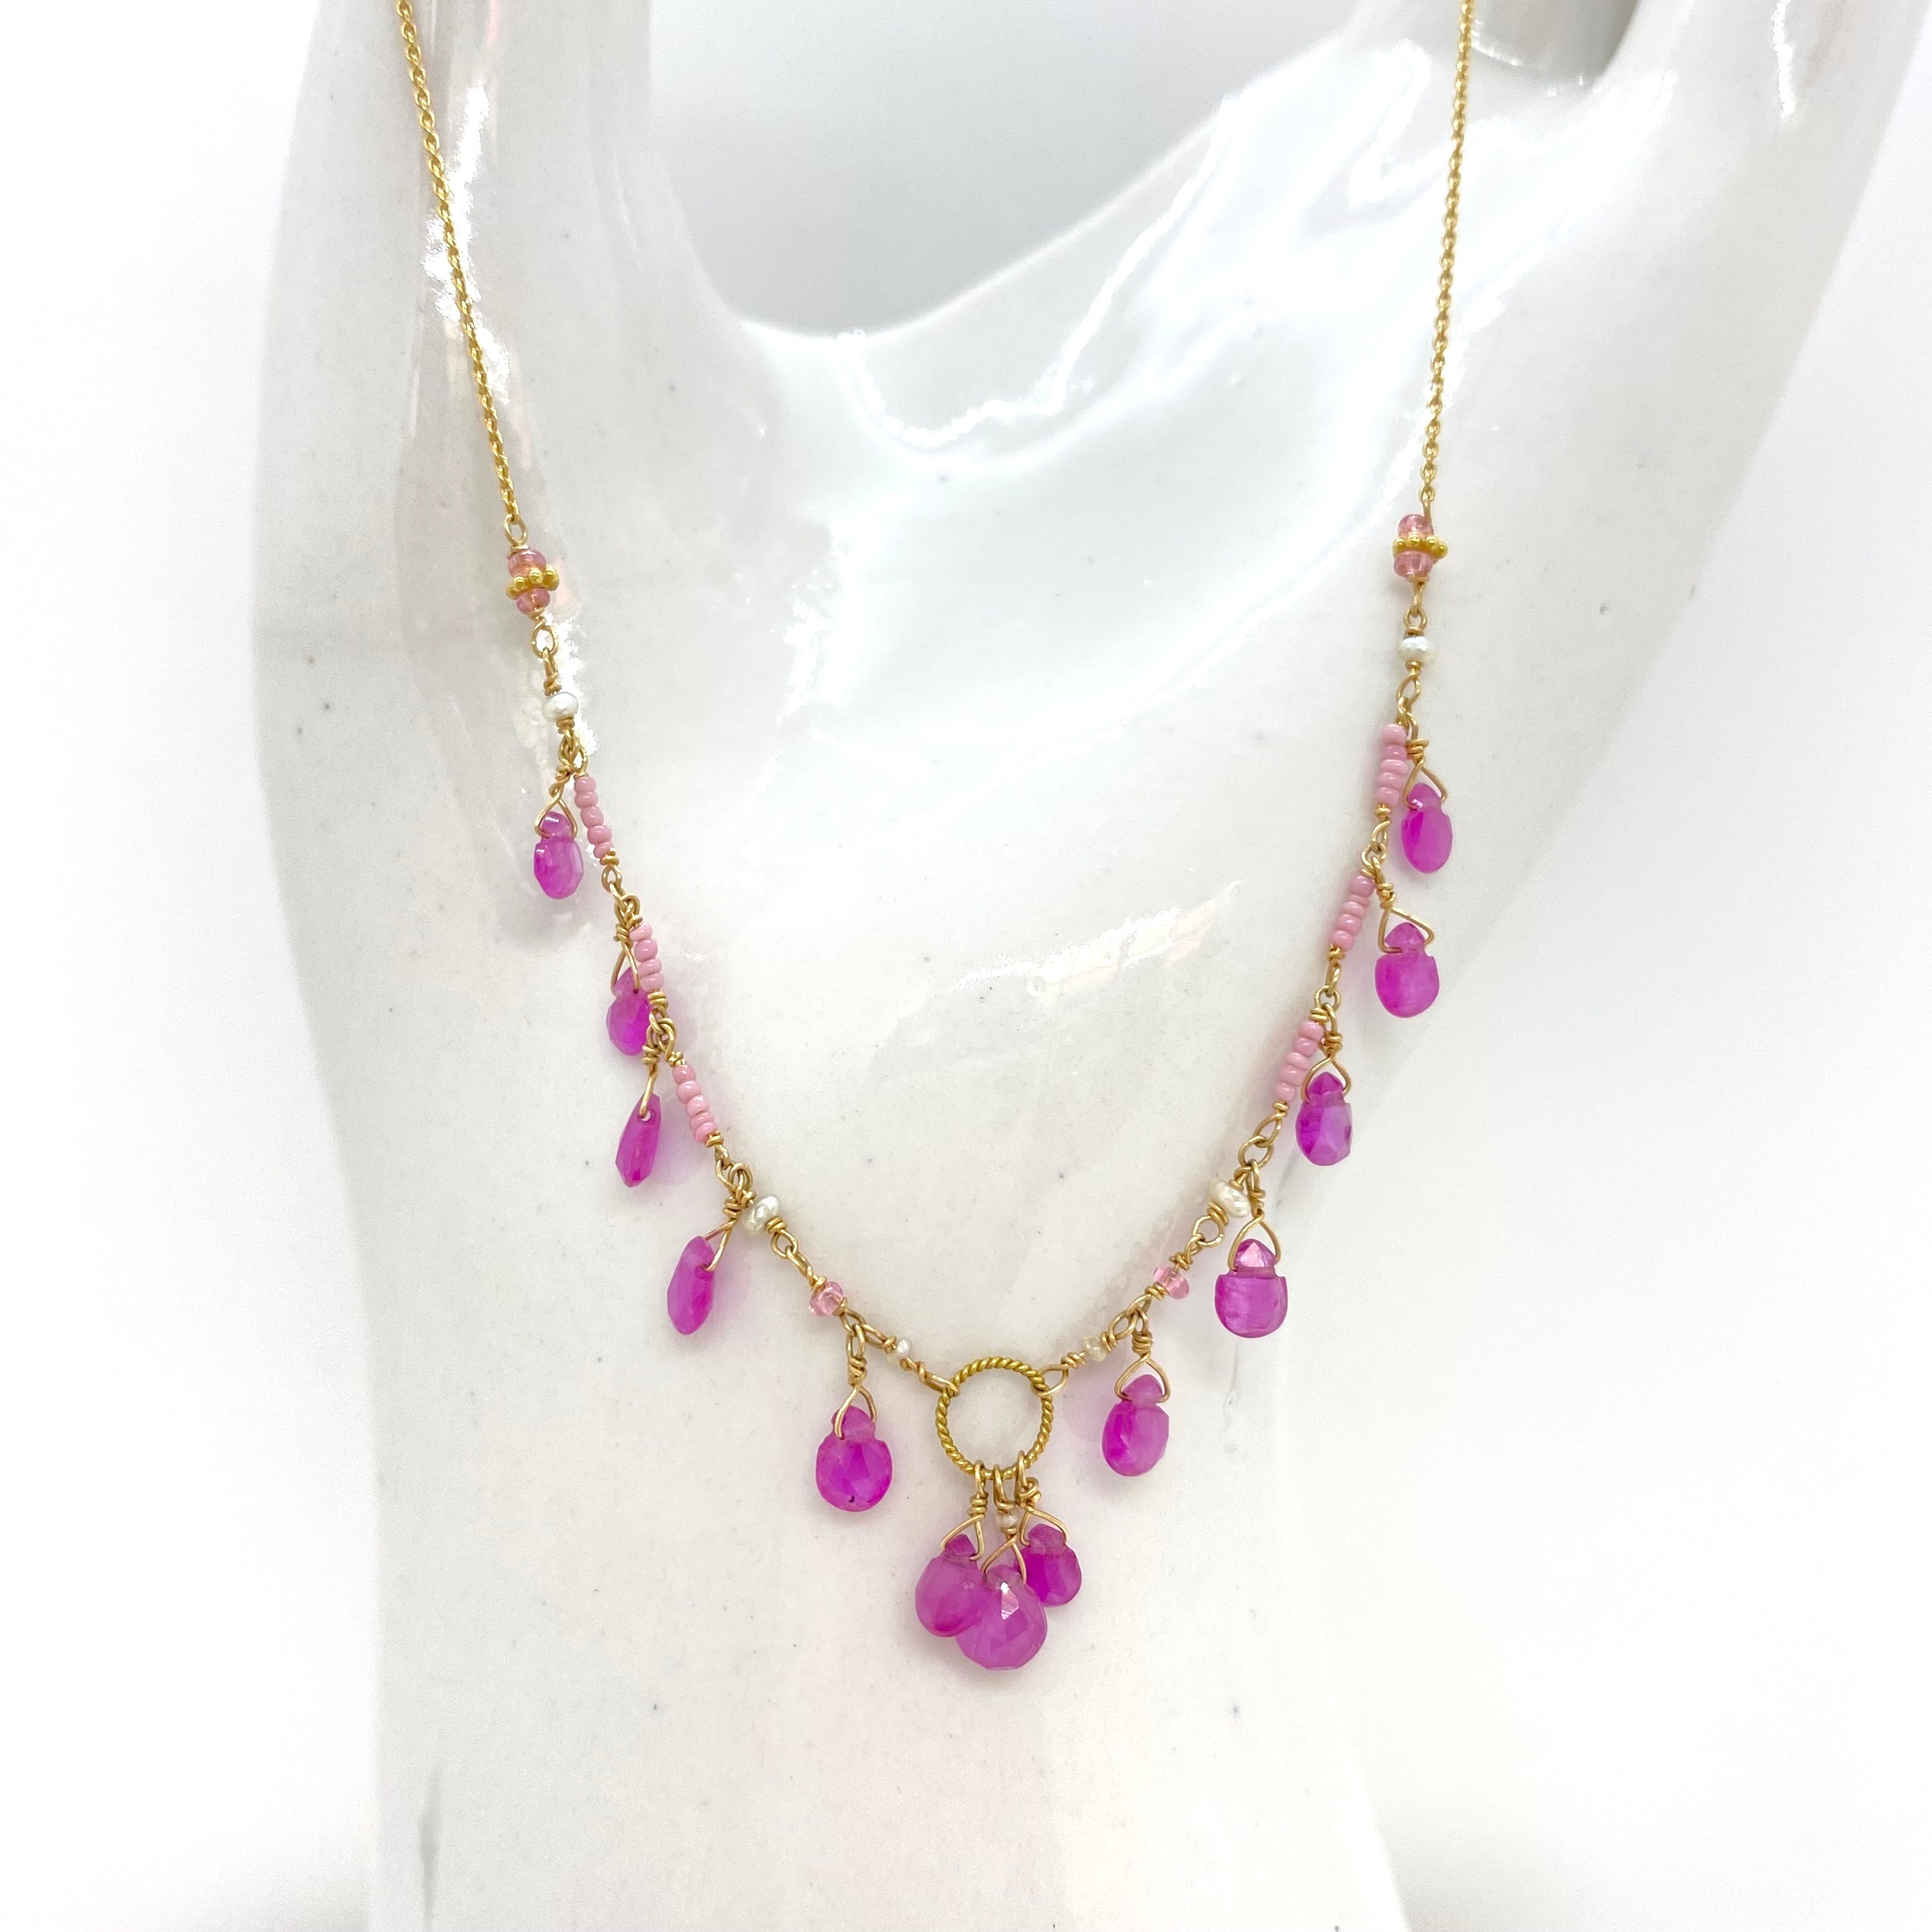 14k Gold Chain Necklace w/ Pink Sapphires, Freshwater Pearls, 18k Gold Daisy, 18k Gold Loop & Antique Italian Beads